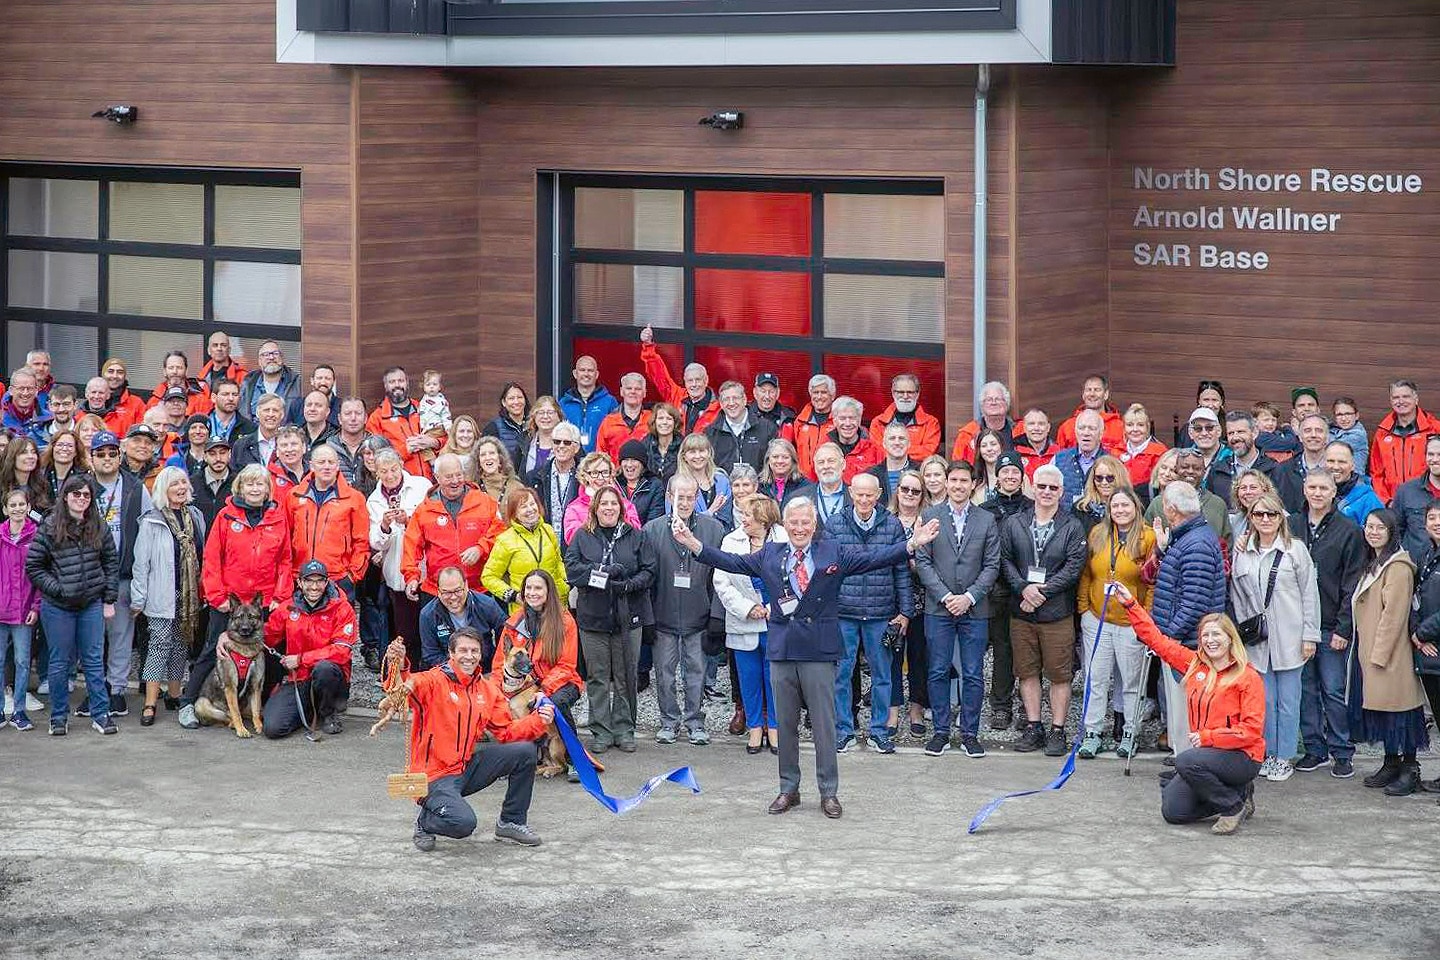 North Shore Rescue Volunteers, their family members and guests – including us –  in attendance at the grand opening of the North Shore Rescue Arnold Wallner SAR Base